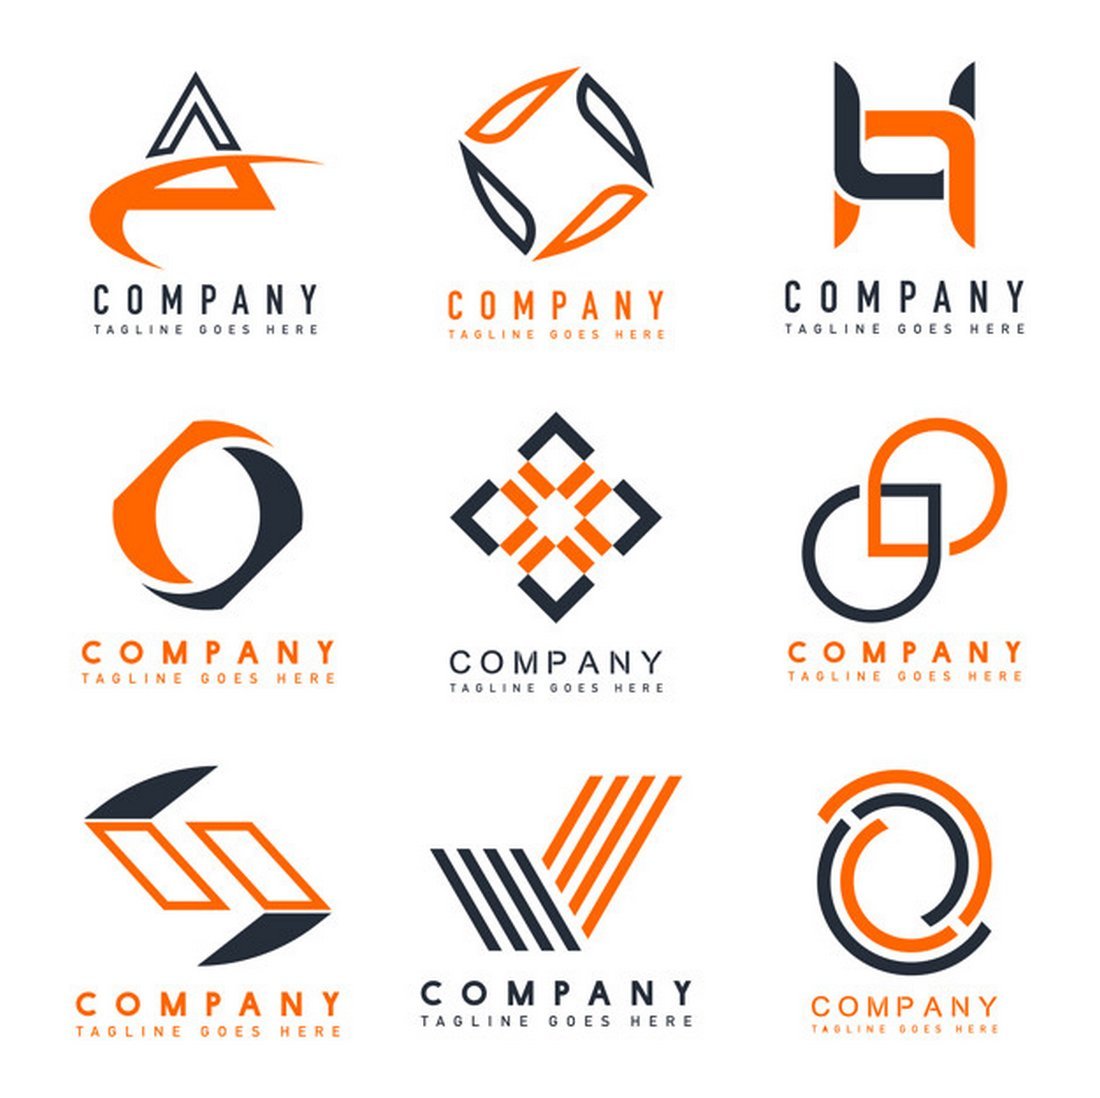 Free Corporate Business Logo Templates